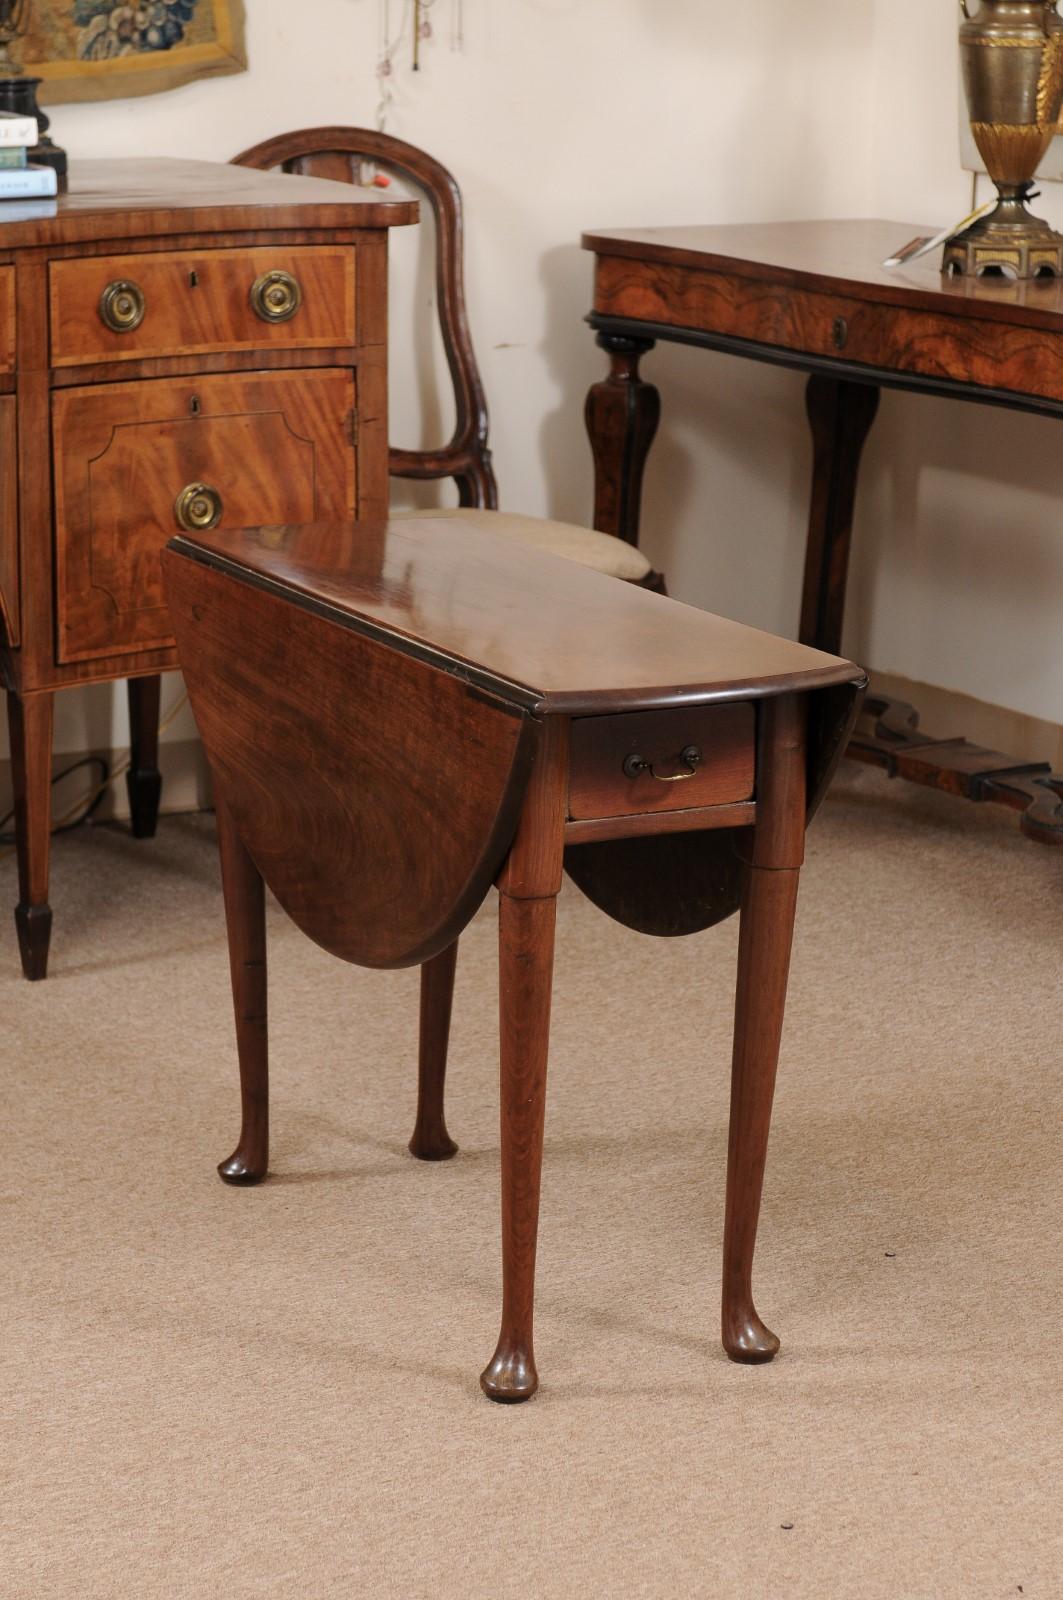 Queen Anne Drop Leaf Table in Walnut with Pad Feet, Early 18th Century England